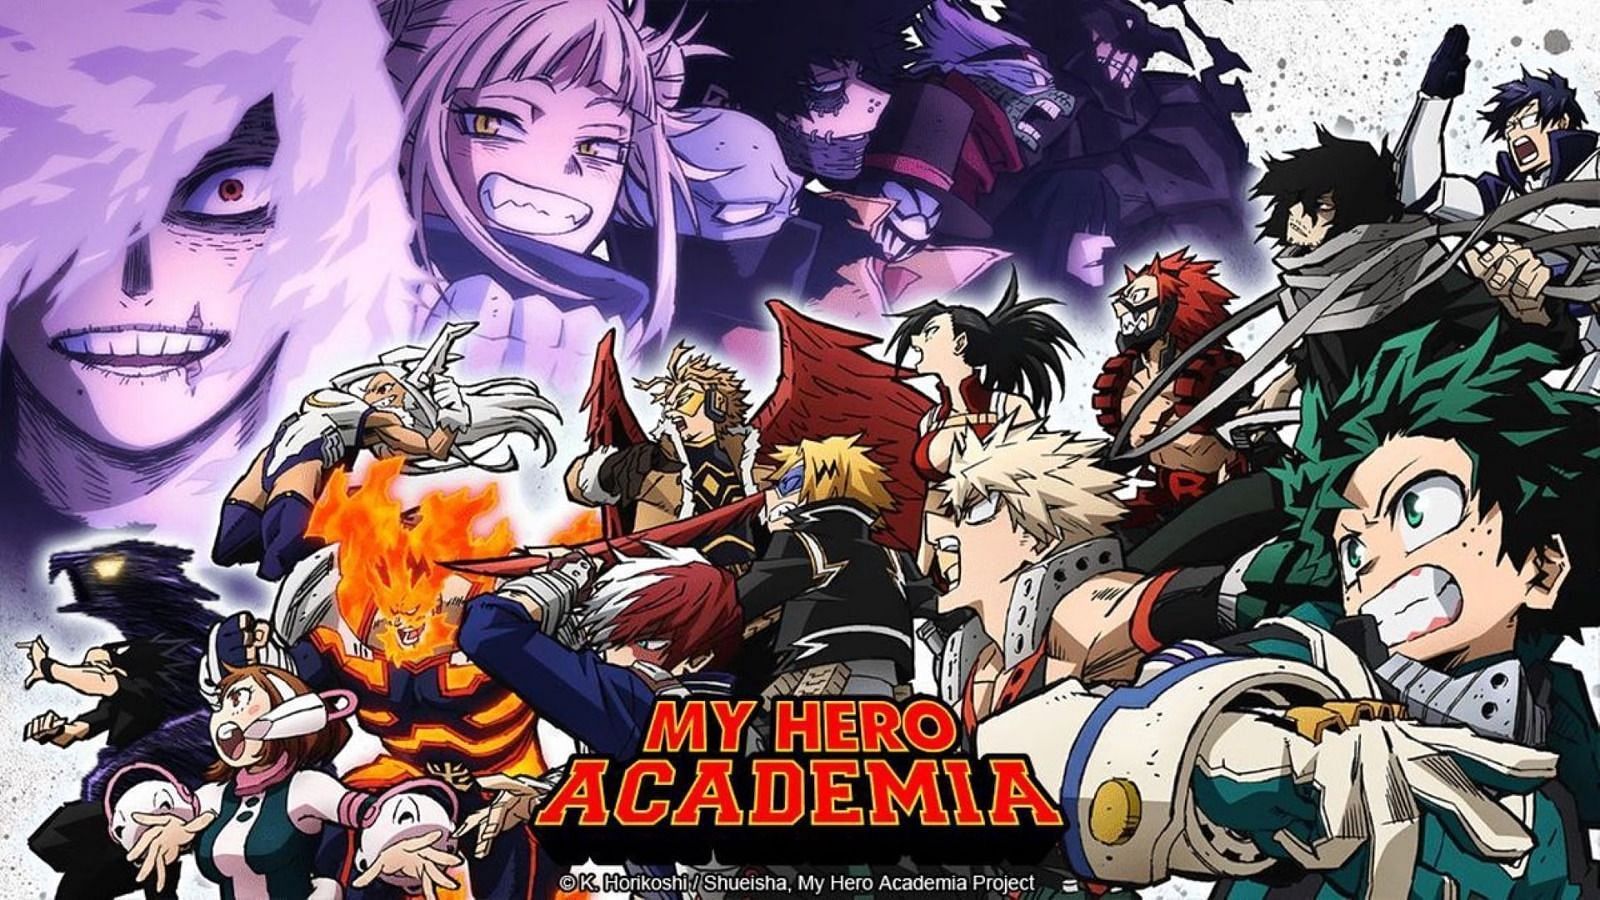 22 My Hero Academia Main Characters Ranked From Worst to Best by Character  Arc  Wealth of Geeks